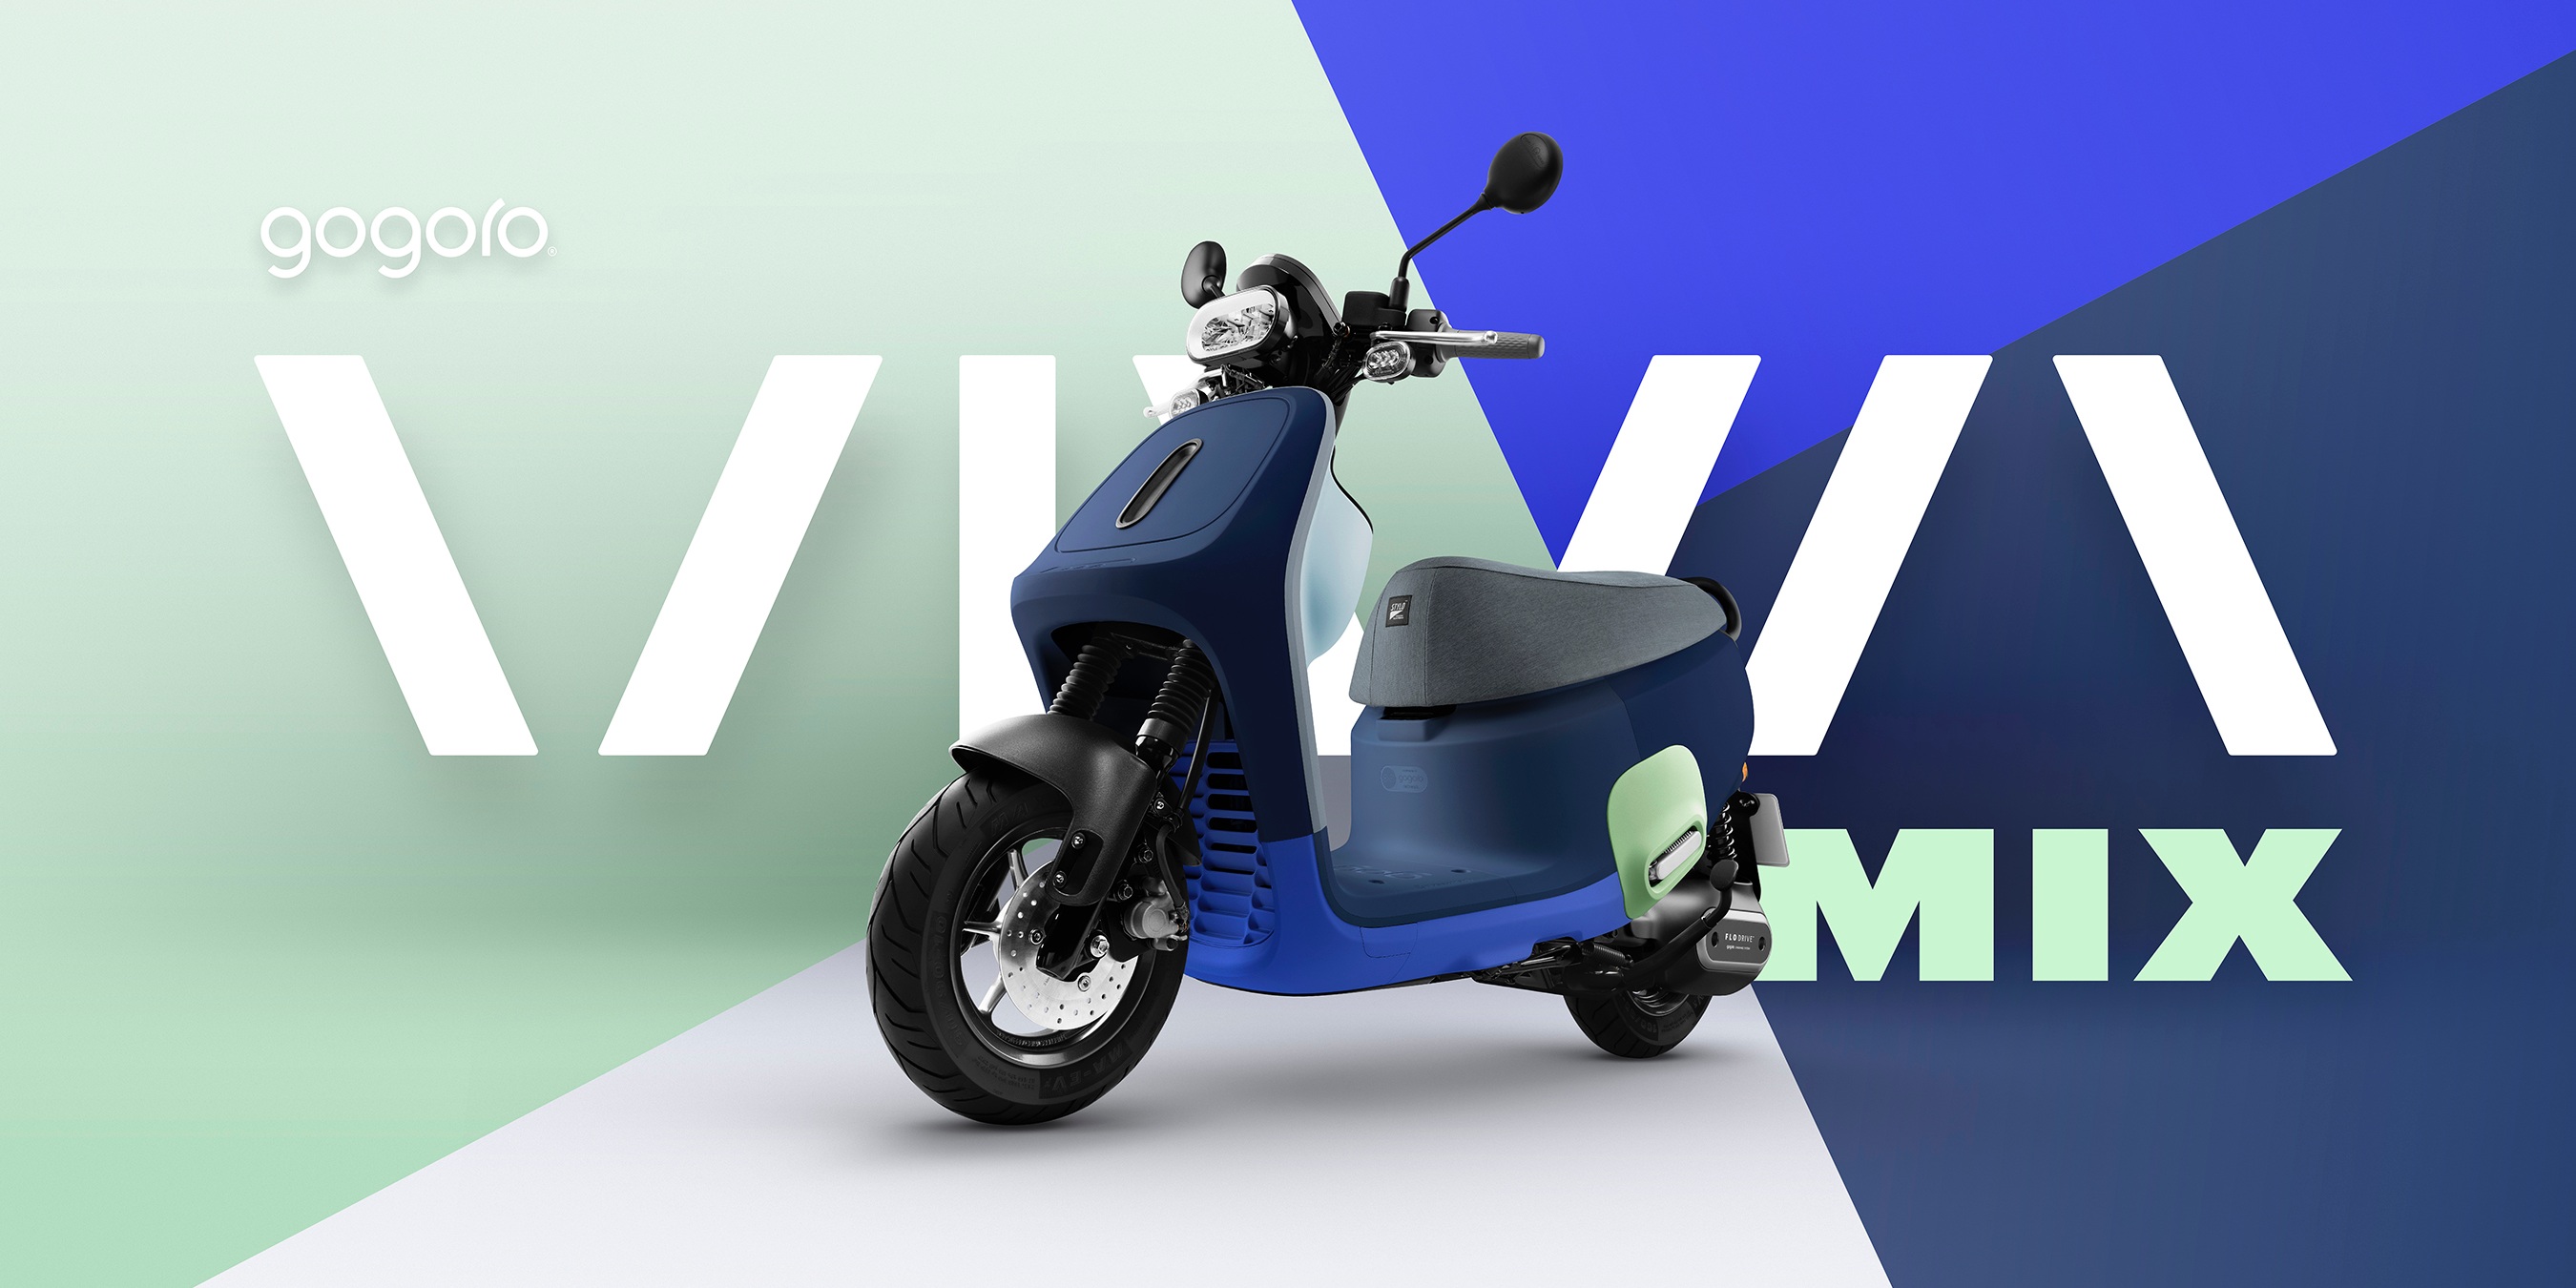 Gogoro MIX: New 55 mph electric scooter with water-cooled motor